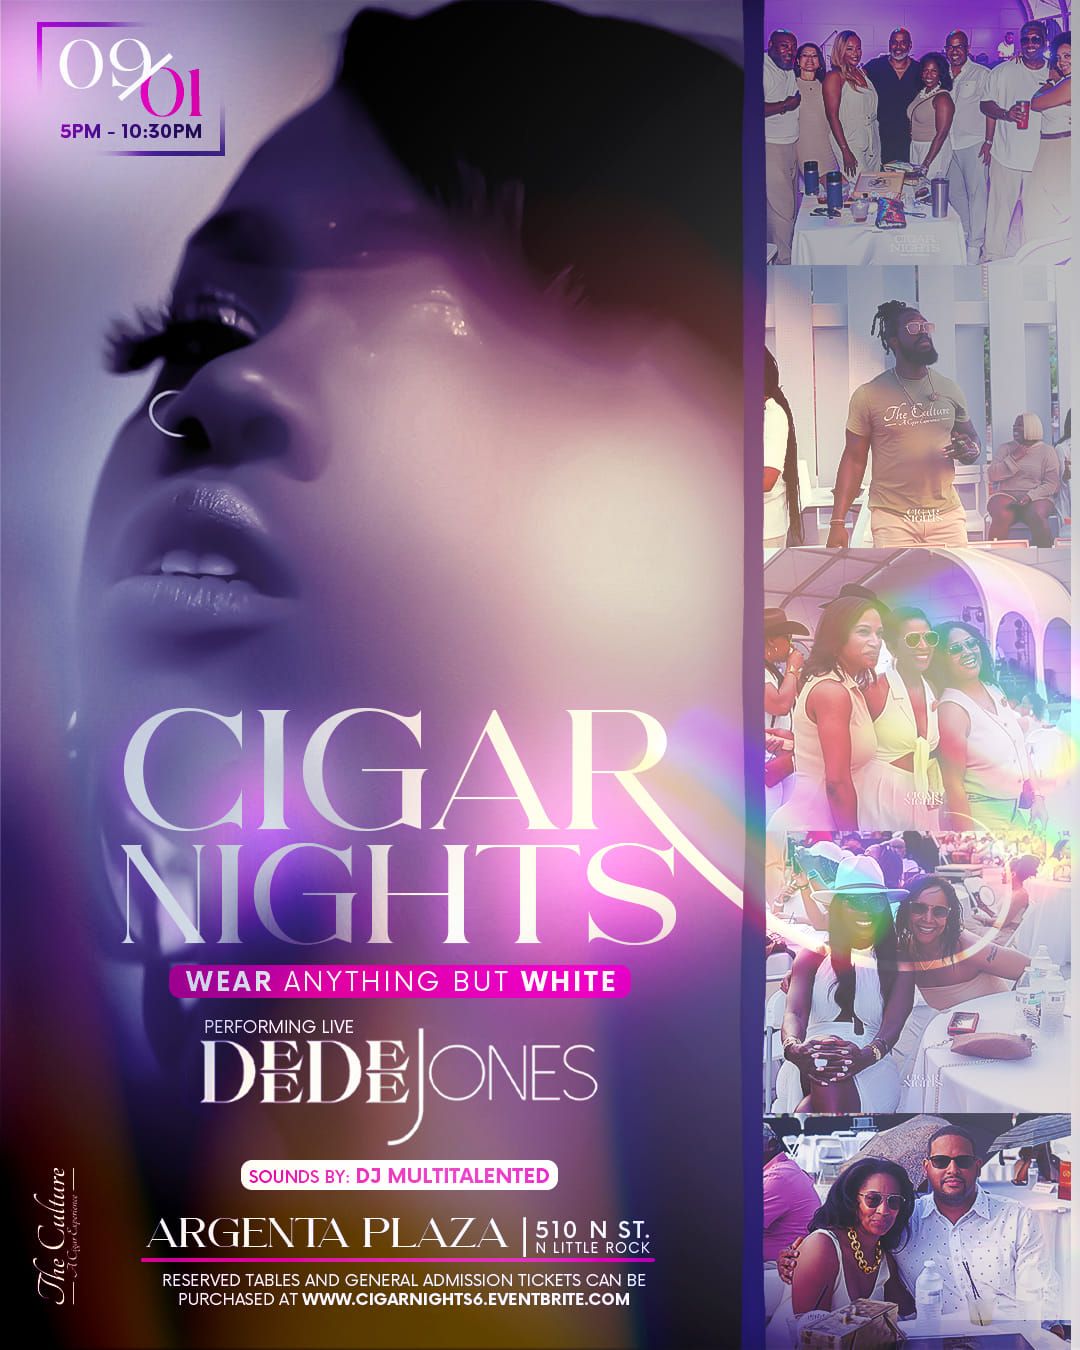 Cigar Nights "Wear anything but White"